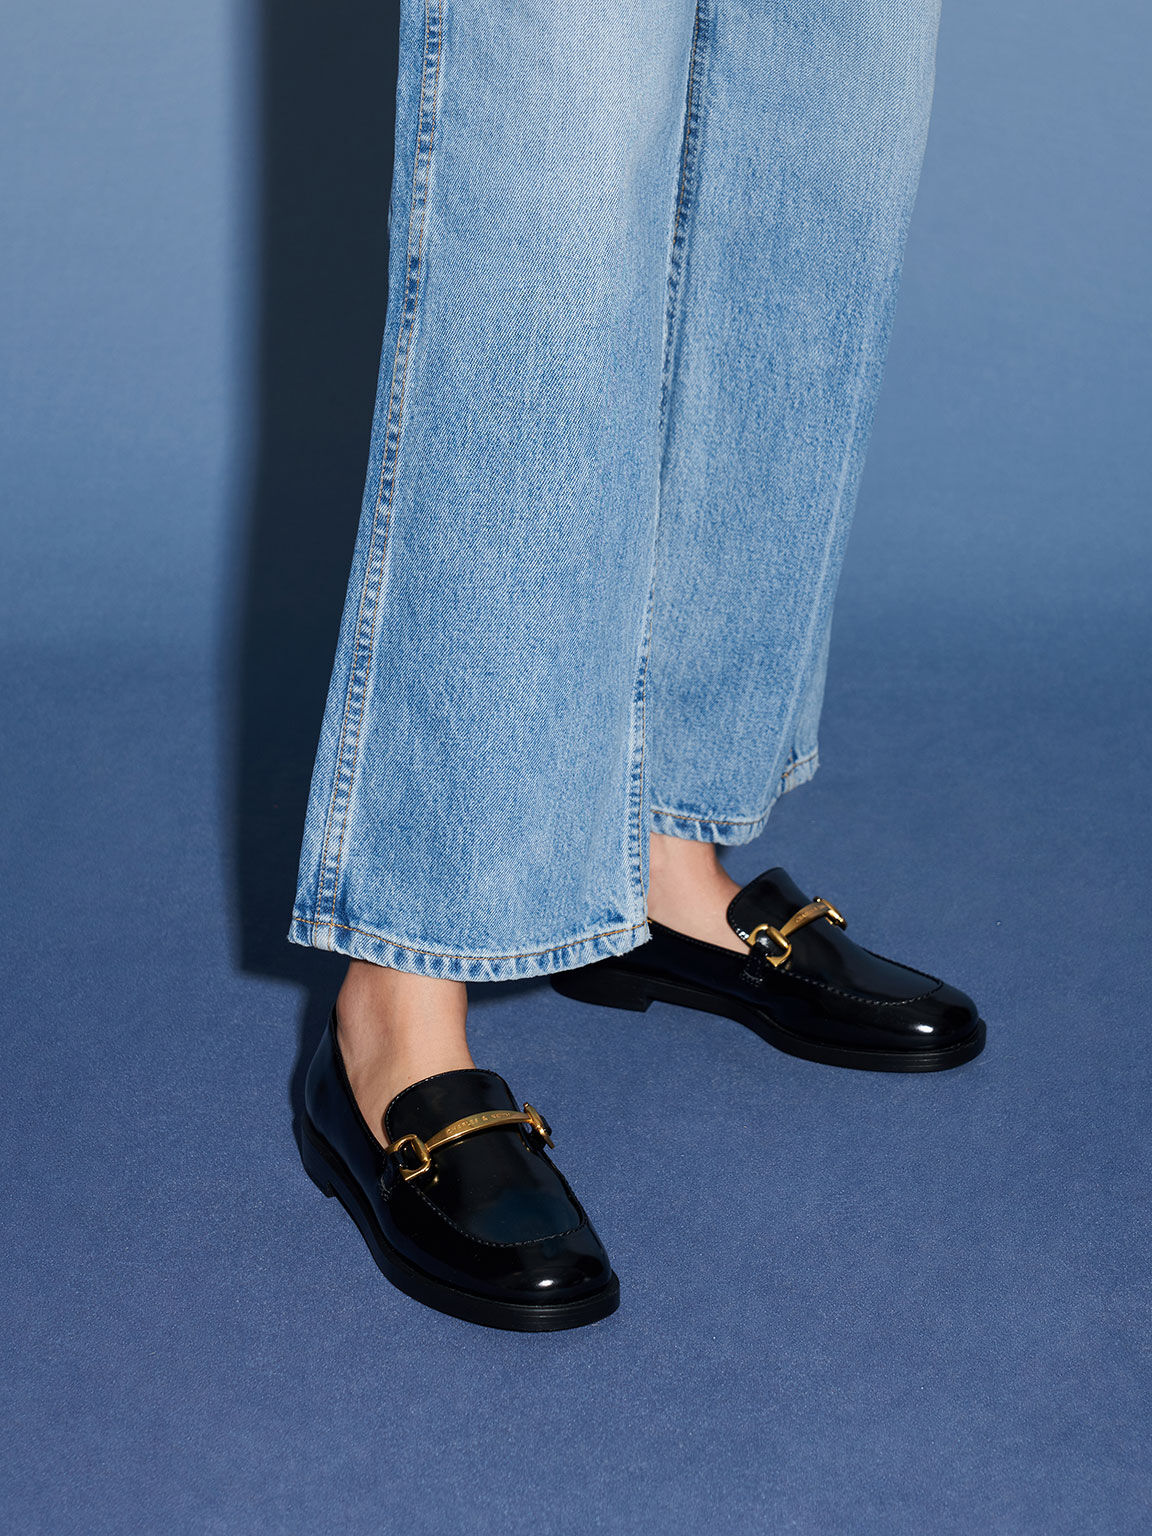 Metallic Accent Loafers - Black, £59, Charles & Keith